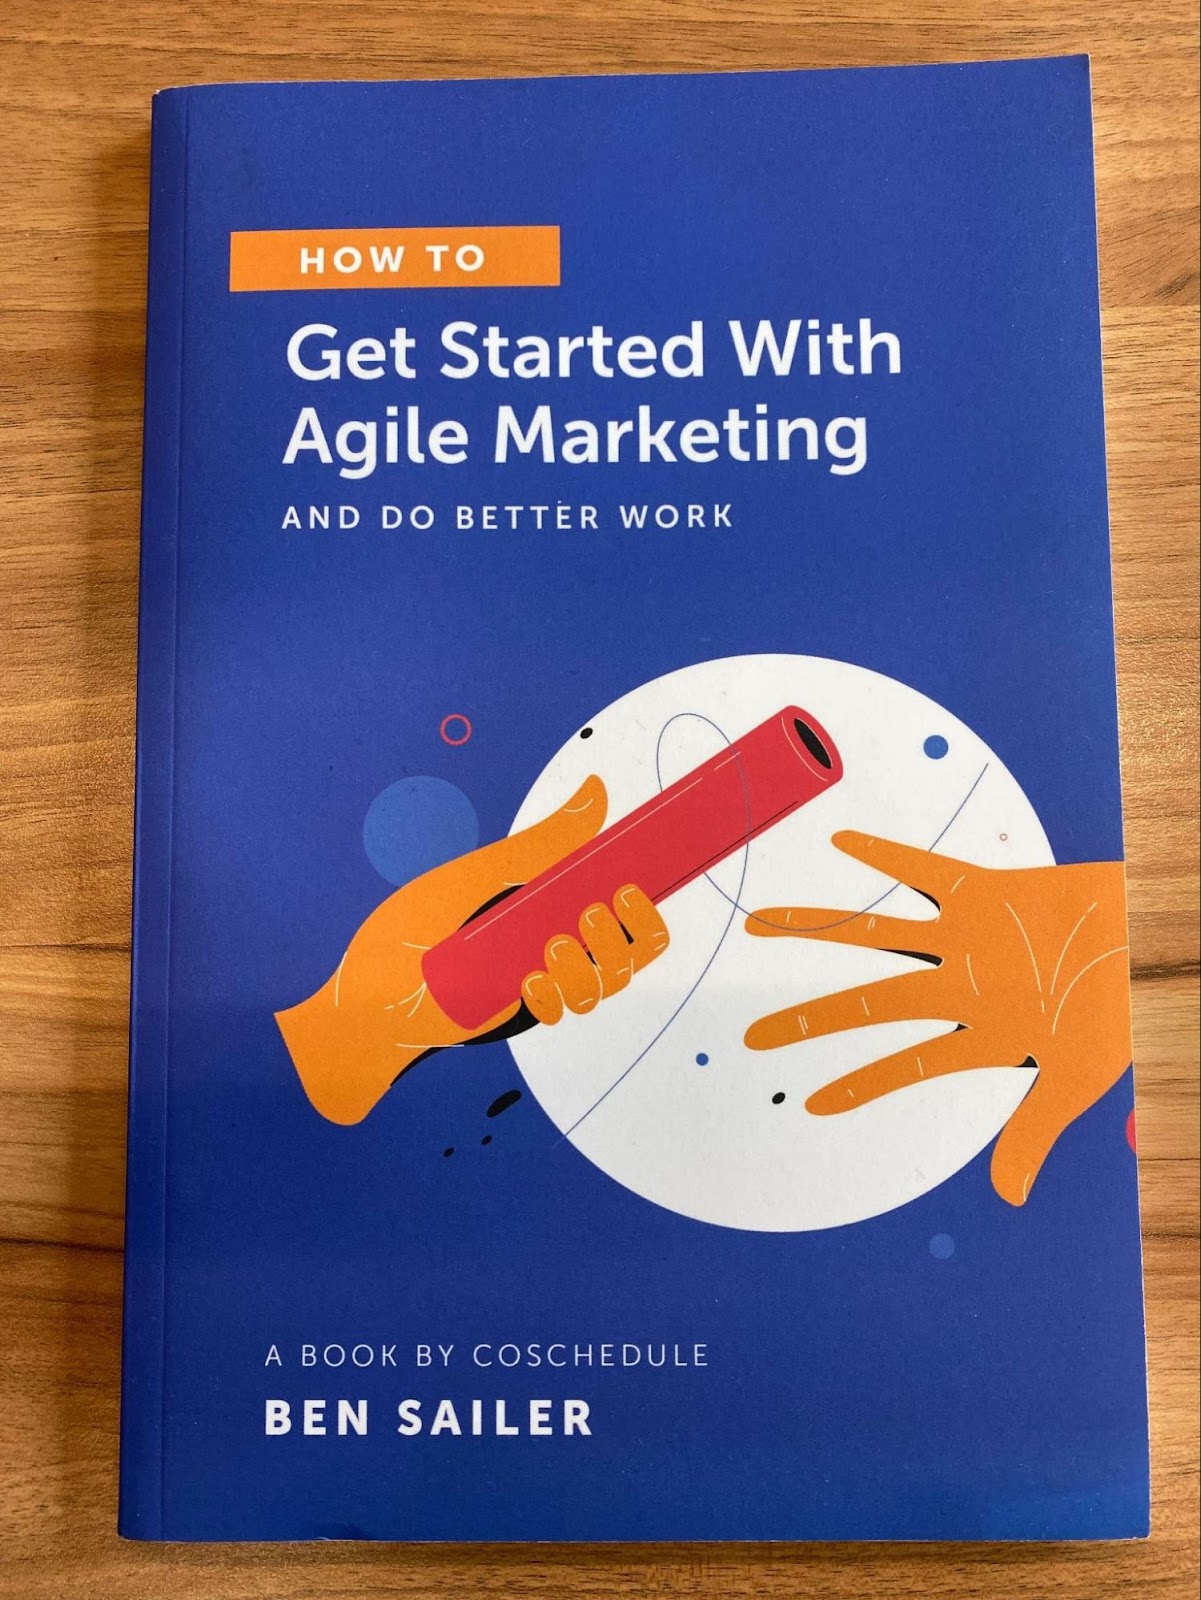 Book cover of "How To Get Started With Agile Marketing And Do Better Work" 